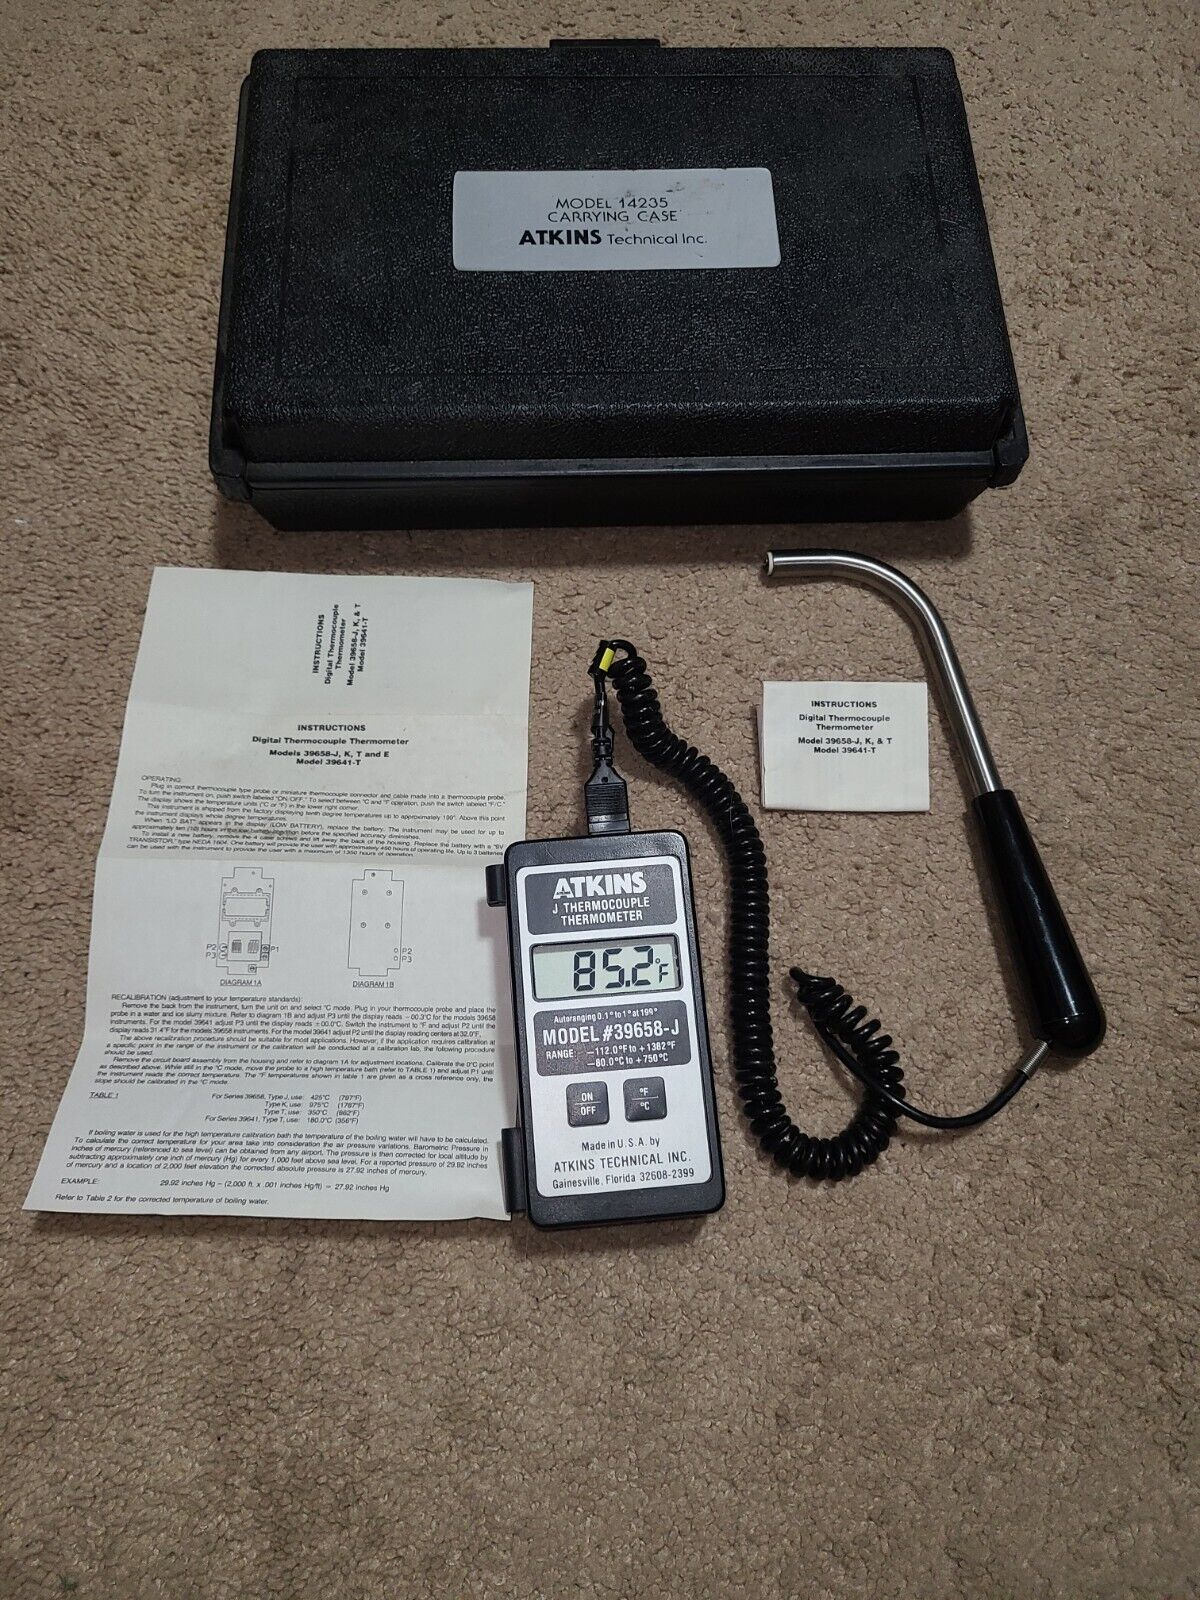 Atkins J Thermocouple Thermometer Digital # 39658-J w Carrying Case 14235  MINT